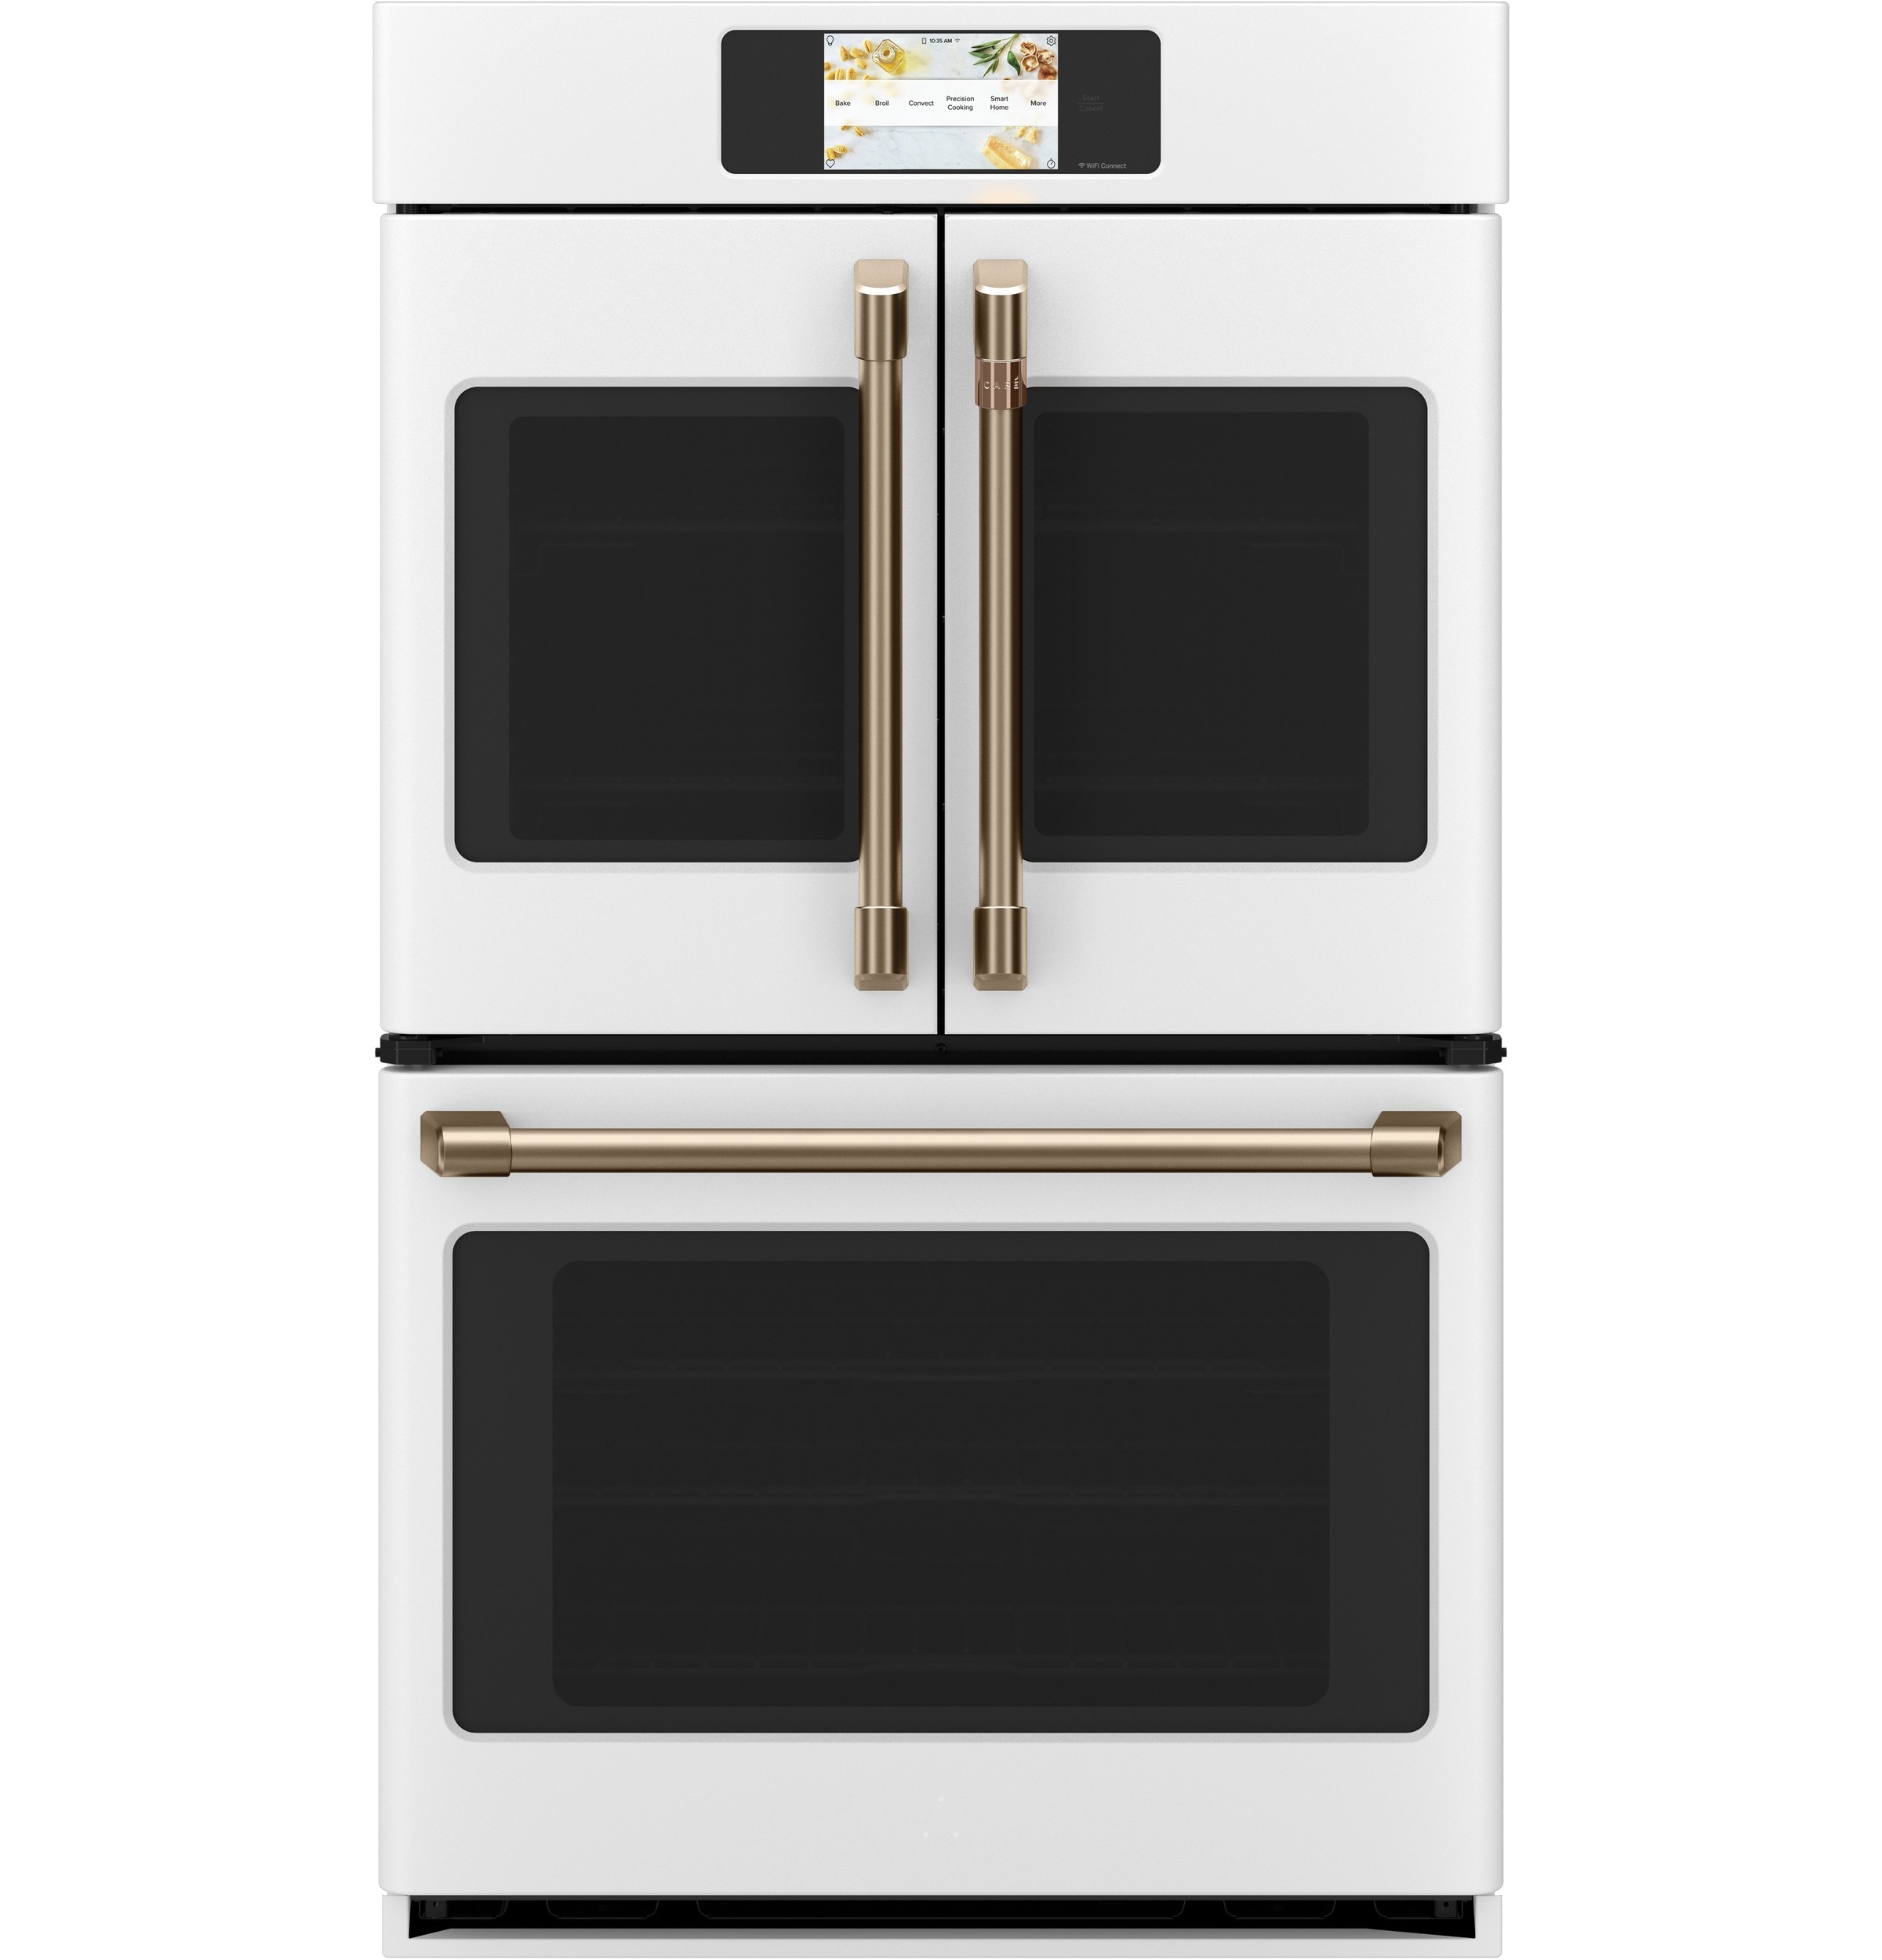 Café™ 30 in. Combination Double Wall Oven with Convection and